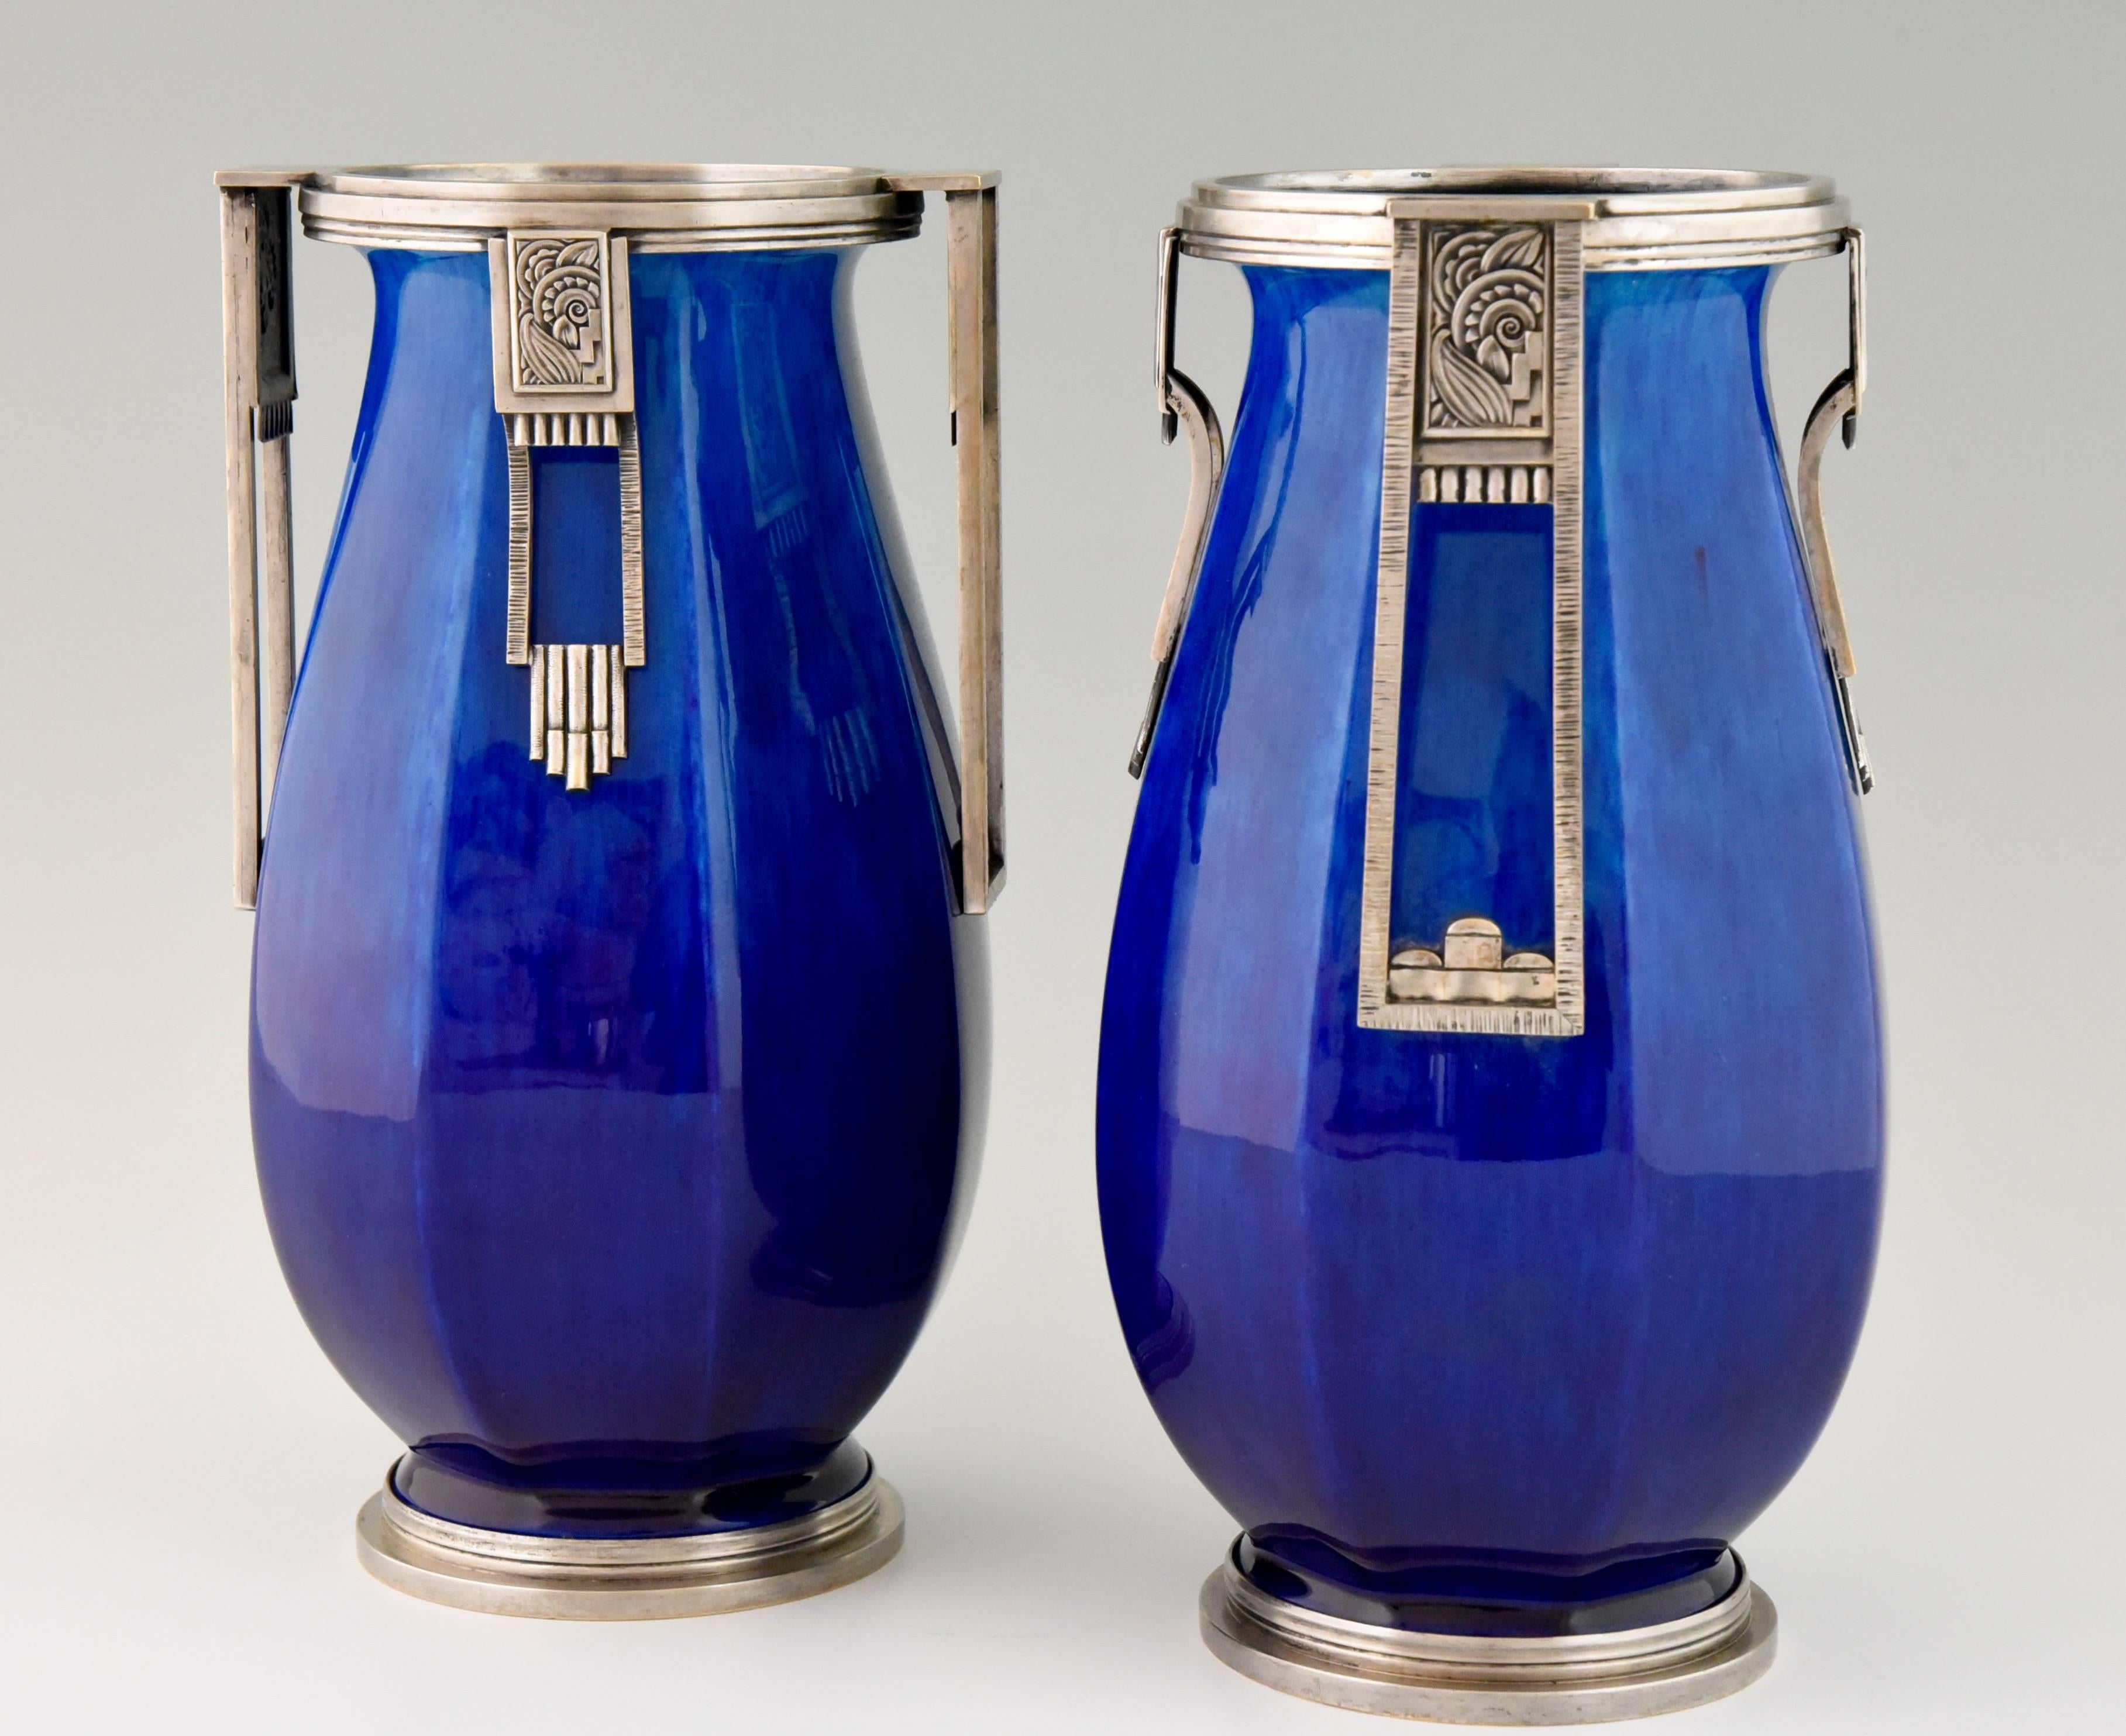 French Art Deco Ceramic and Silvered Bronze Vases by Paul Milet for Sevres, 1925 1